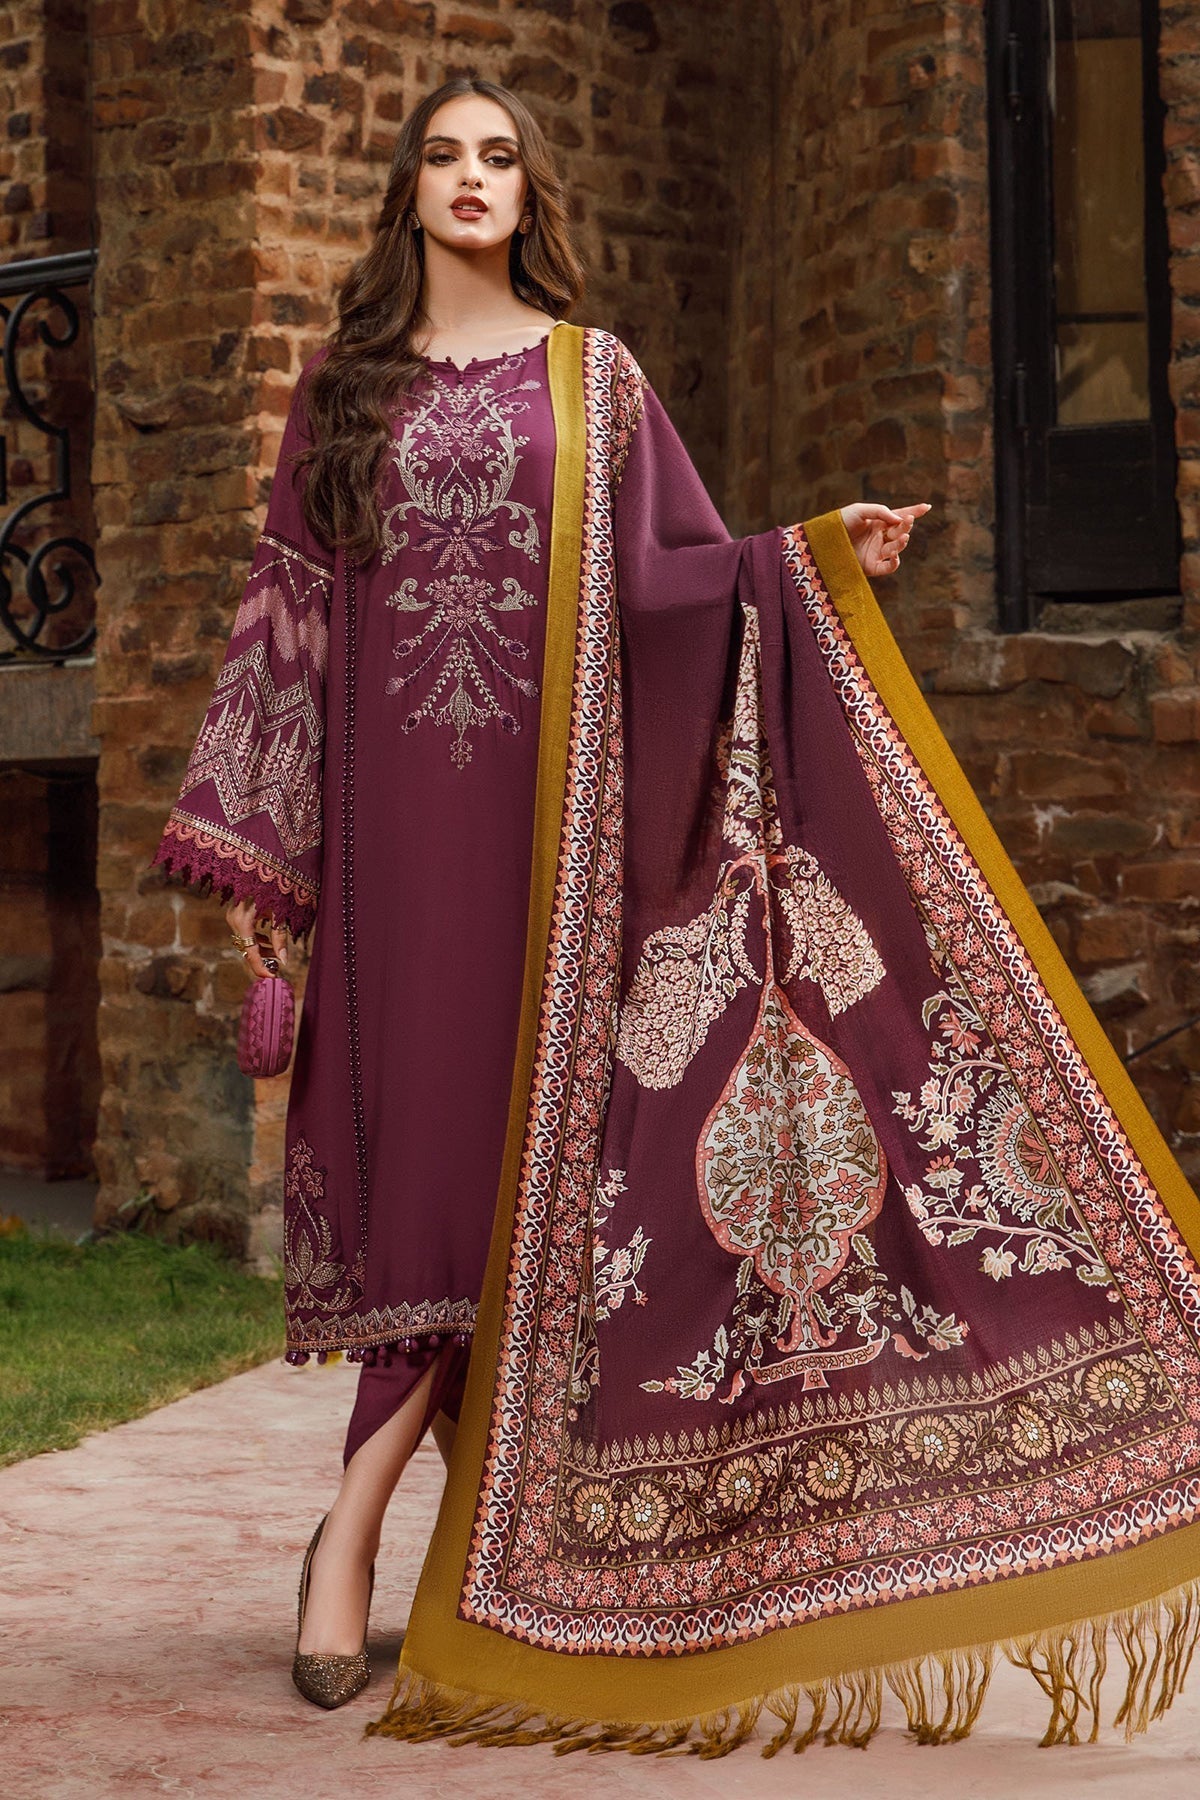 Maria B 3PC Fully Embroidered Dhanak Suit - GA1607